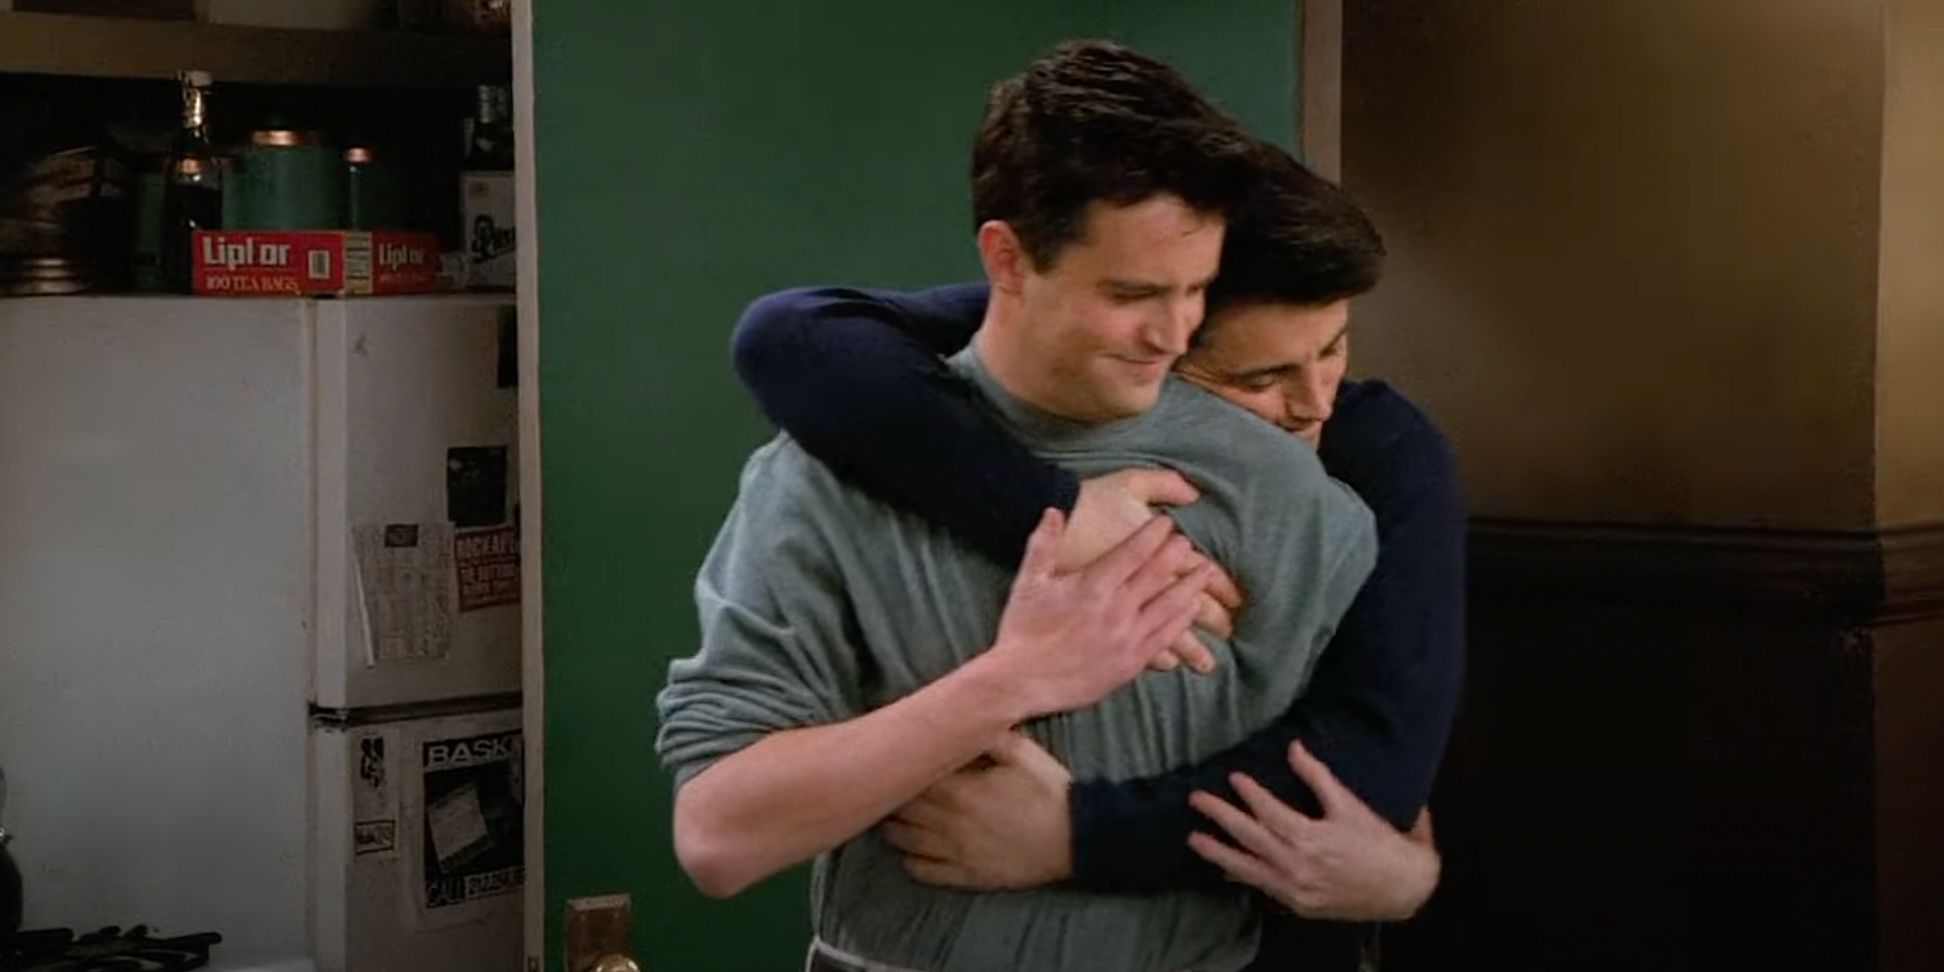 Friends Season 2, Episode 16, “The One Where Joey Moves Out”